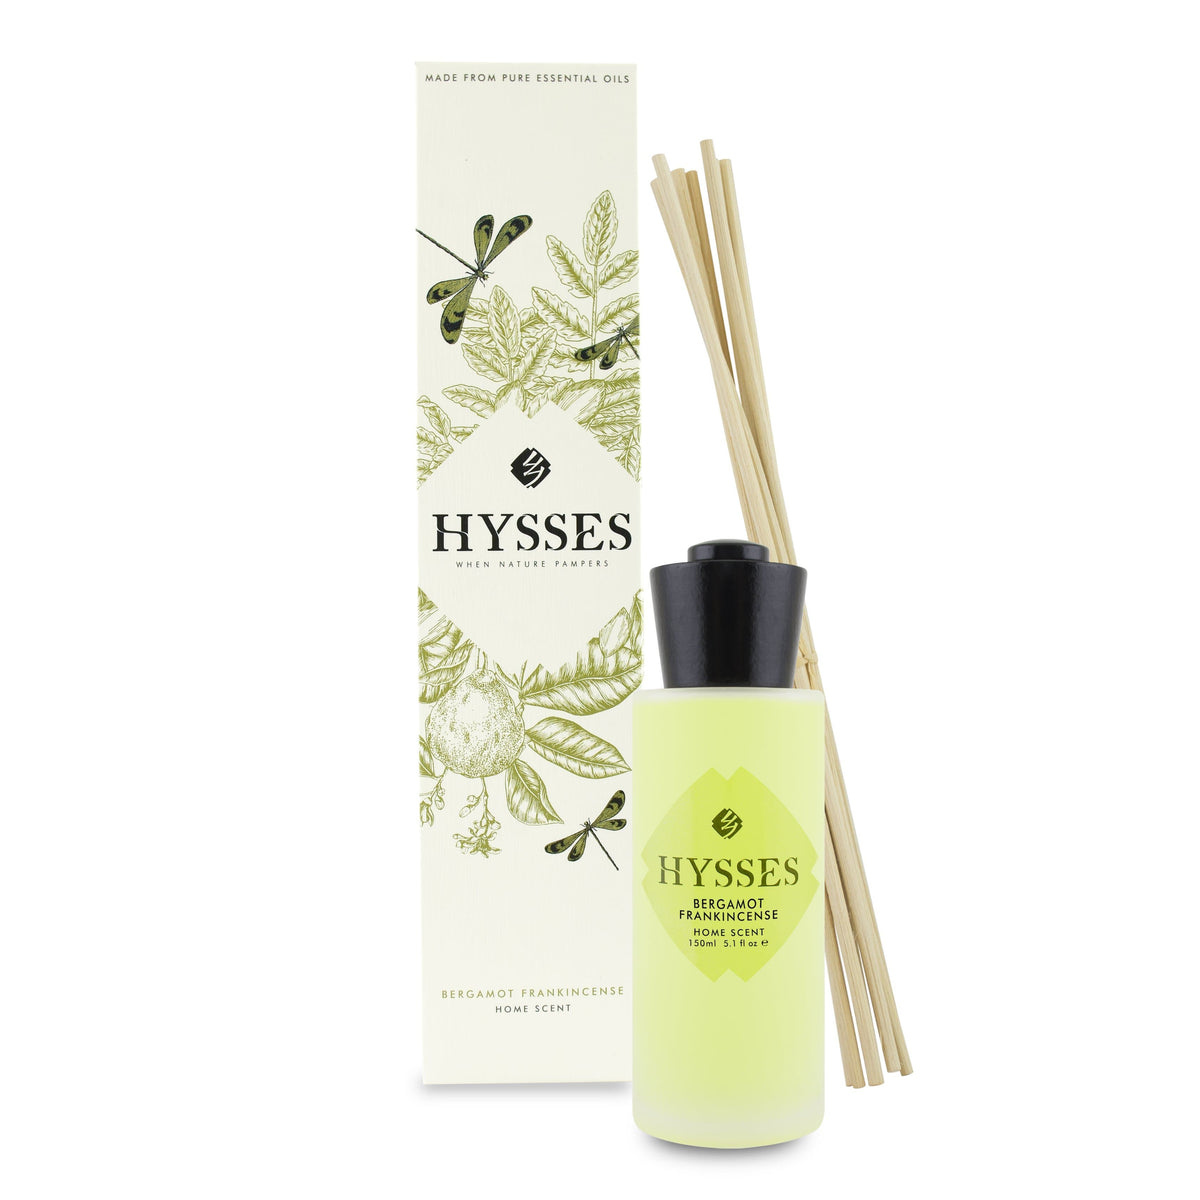 Hysses Home Scents 150ml Home Scent Reed Diffuser Bergamot Frankincense